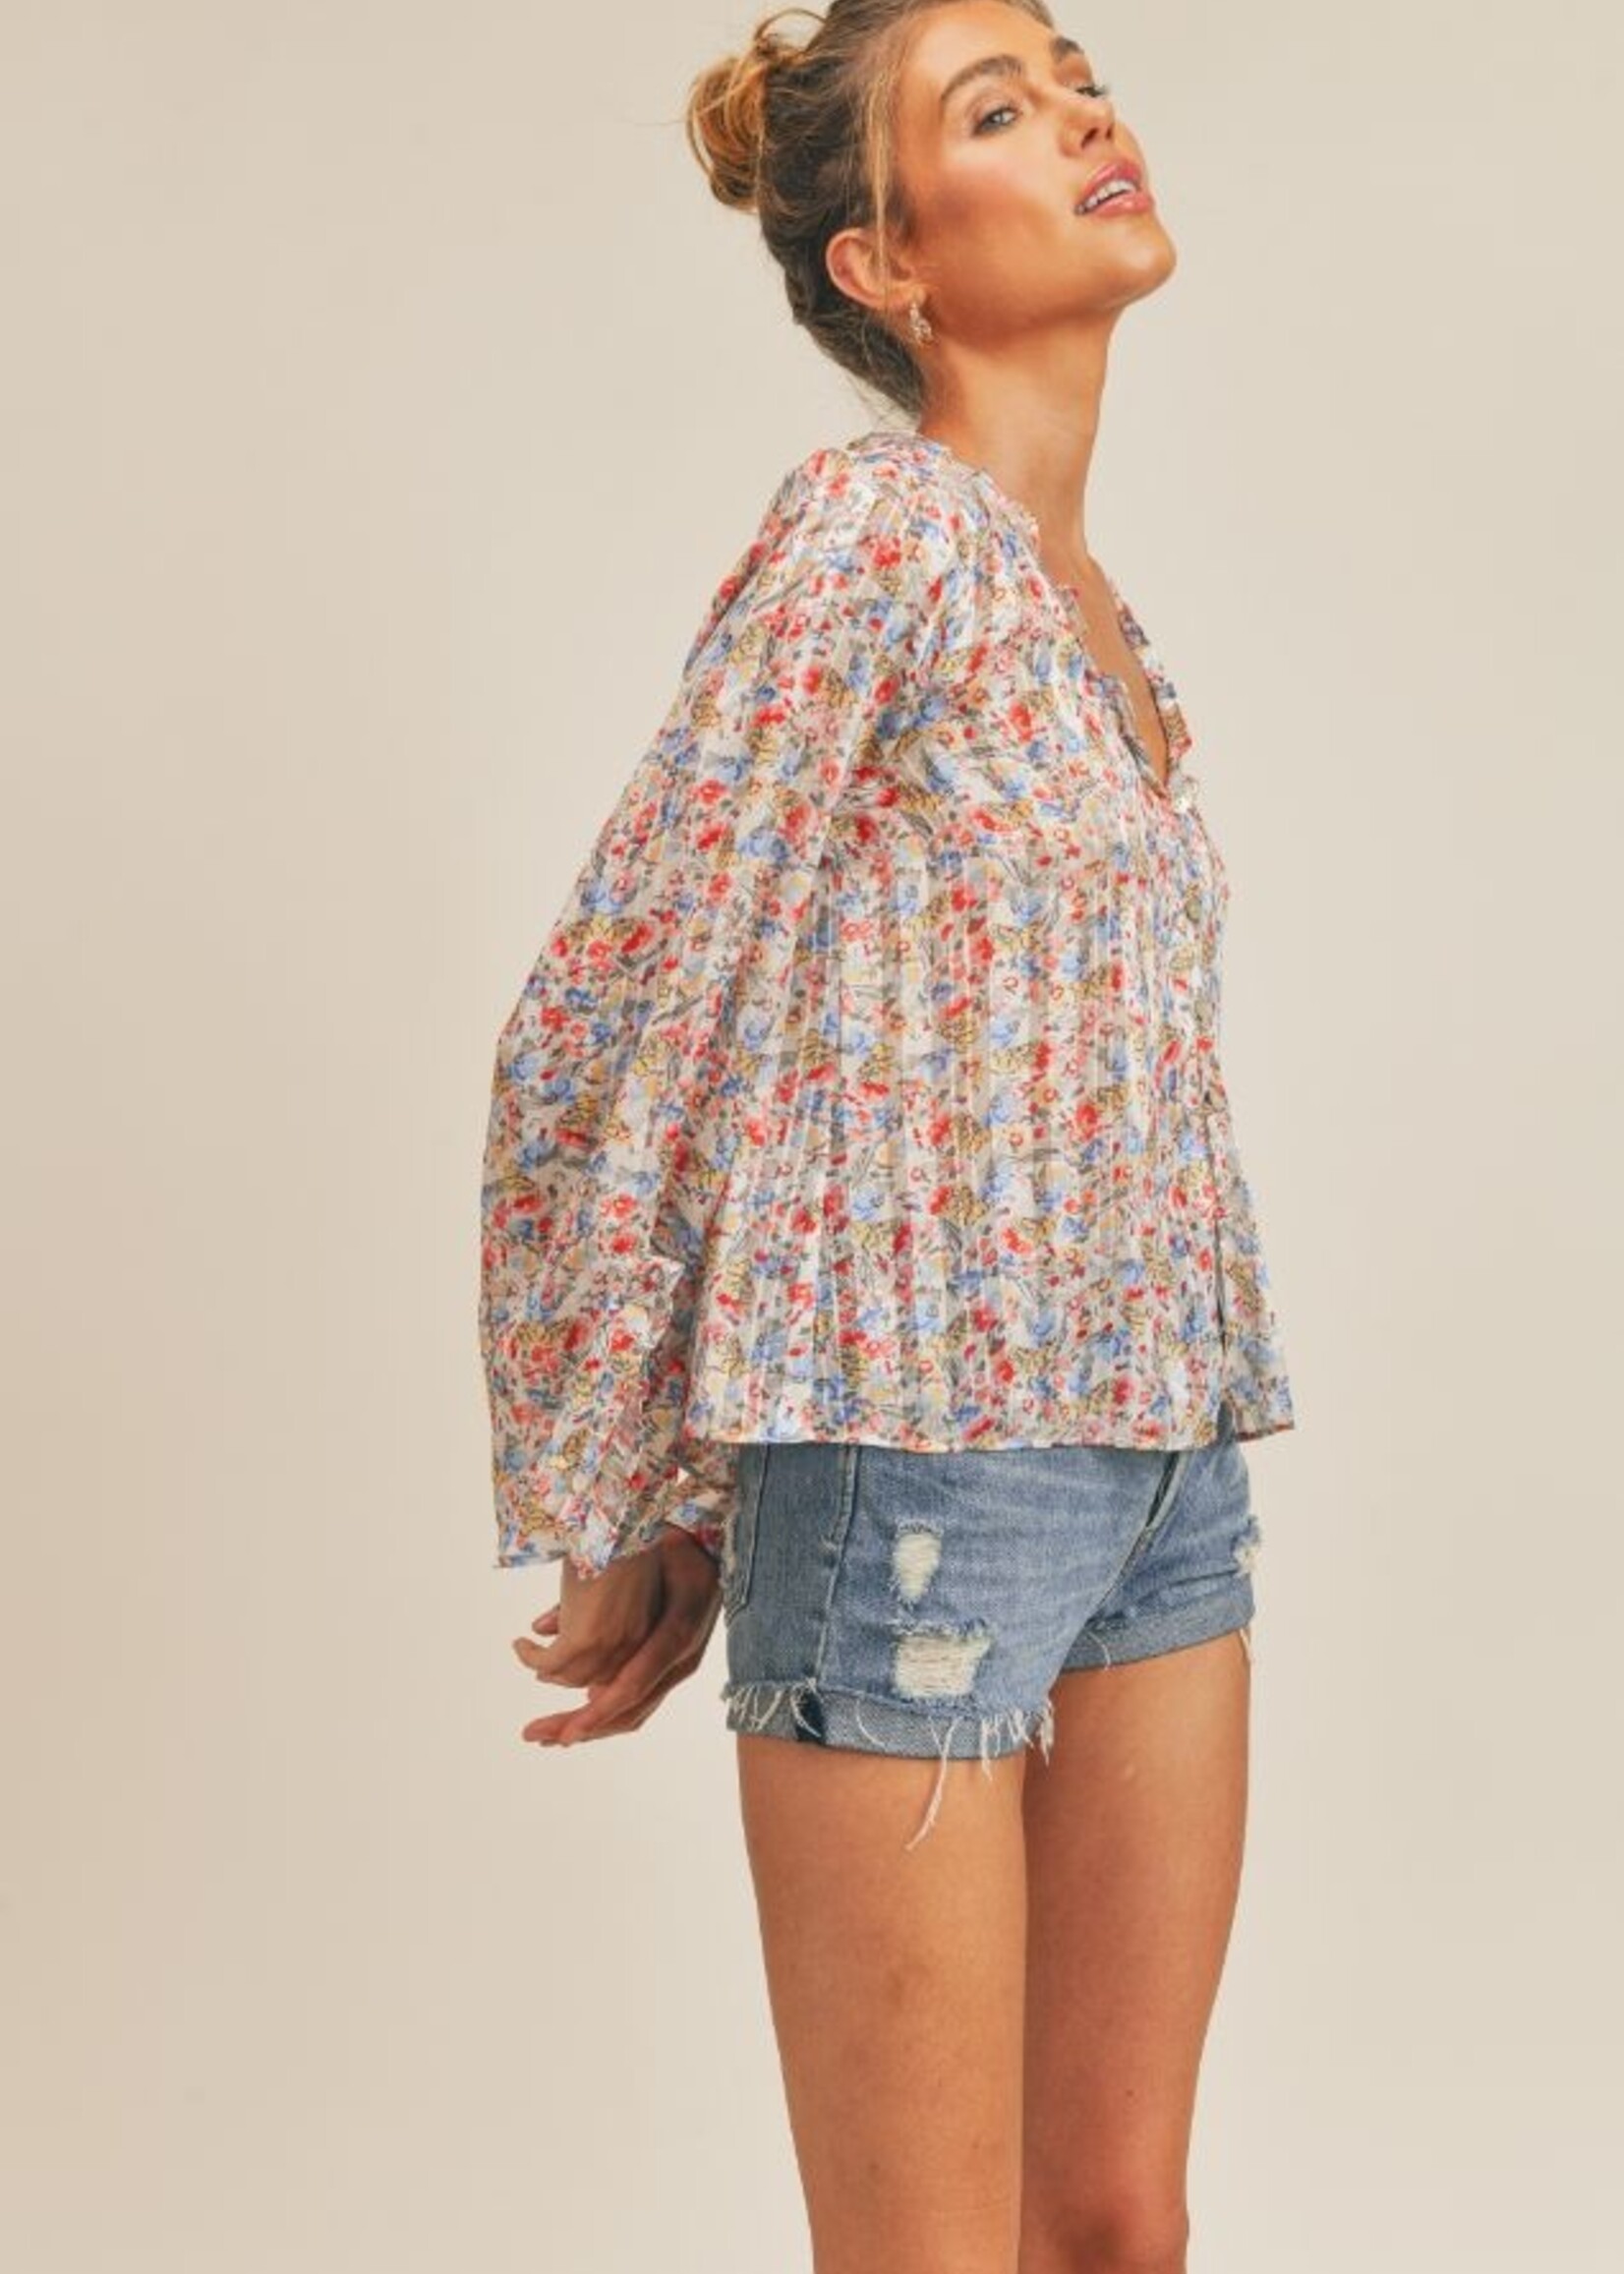 Sage the Label Bustle and Bloom Ruffled Bell Sleeve Top